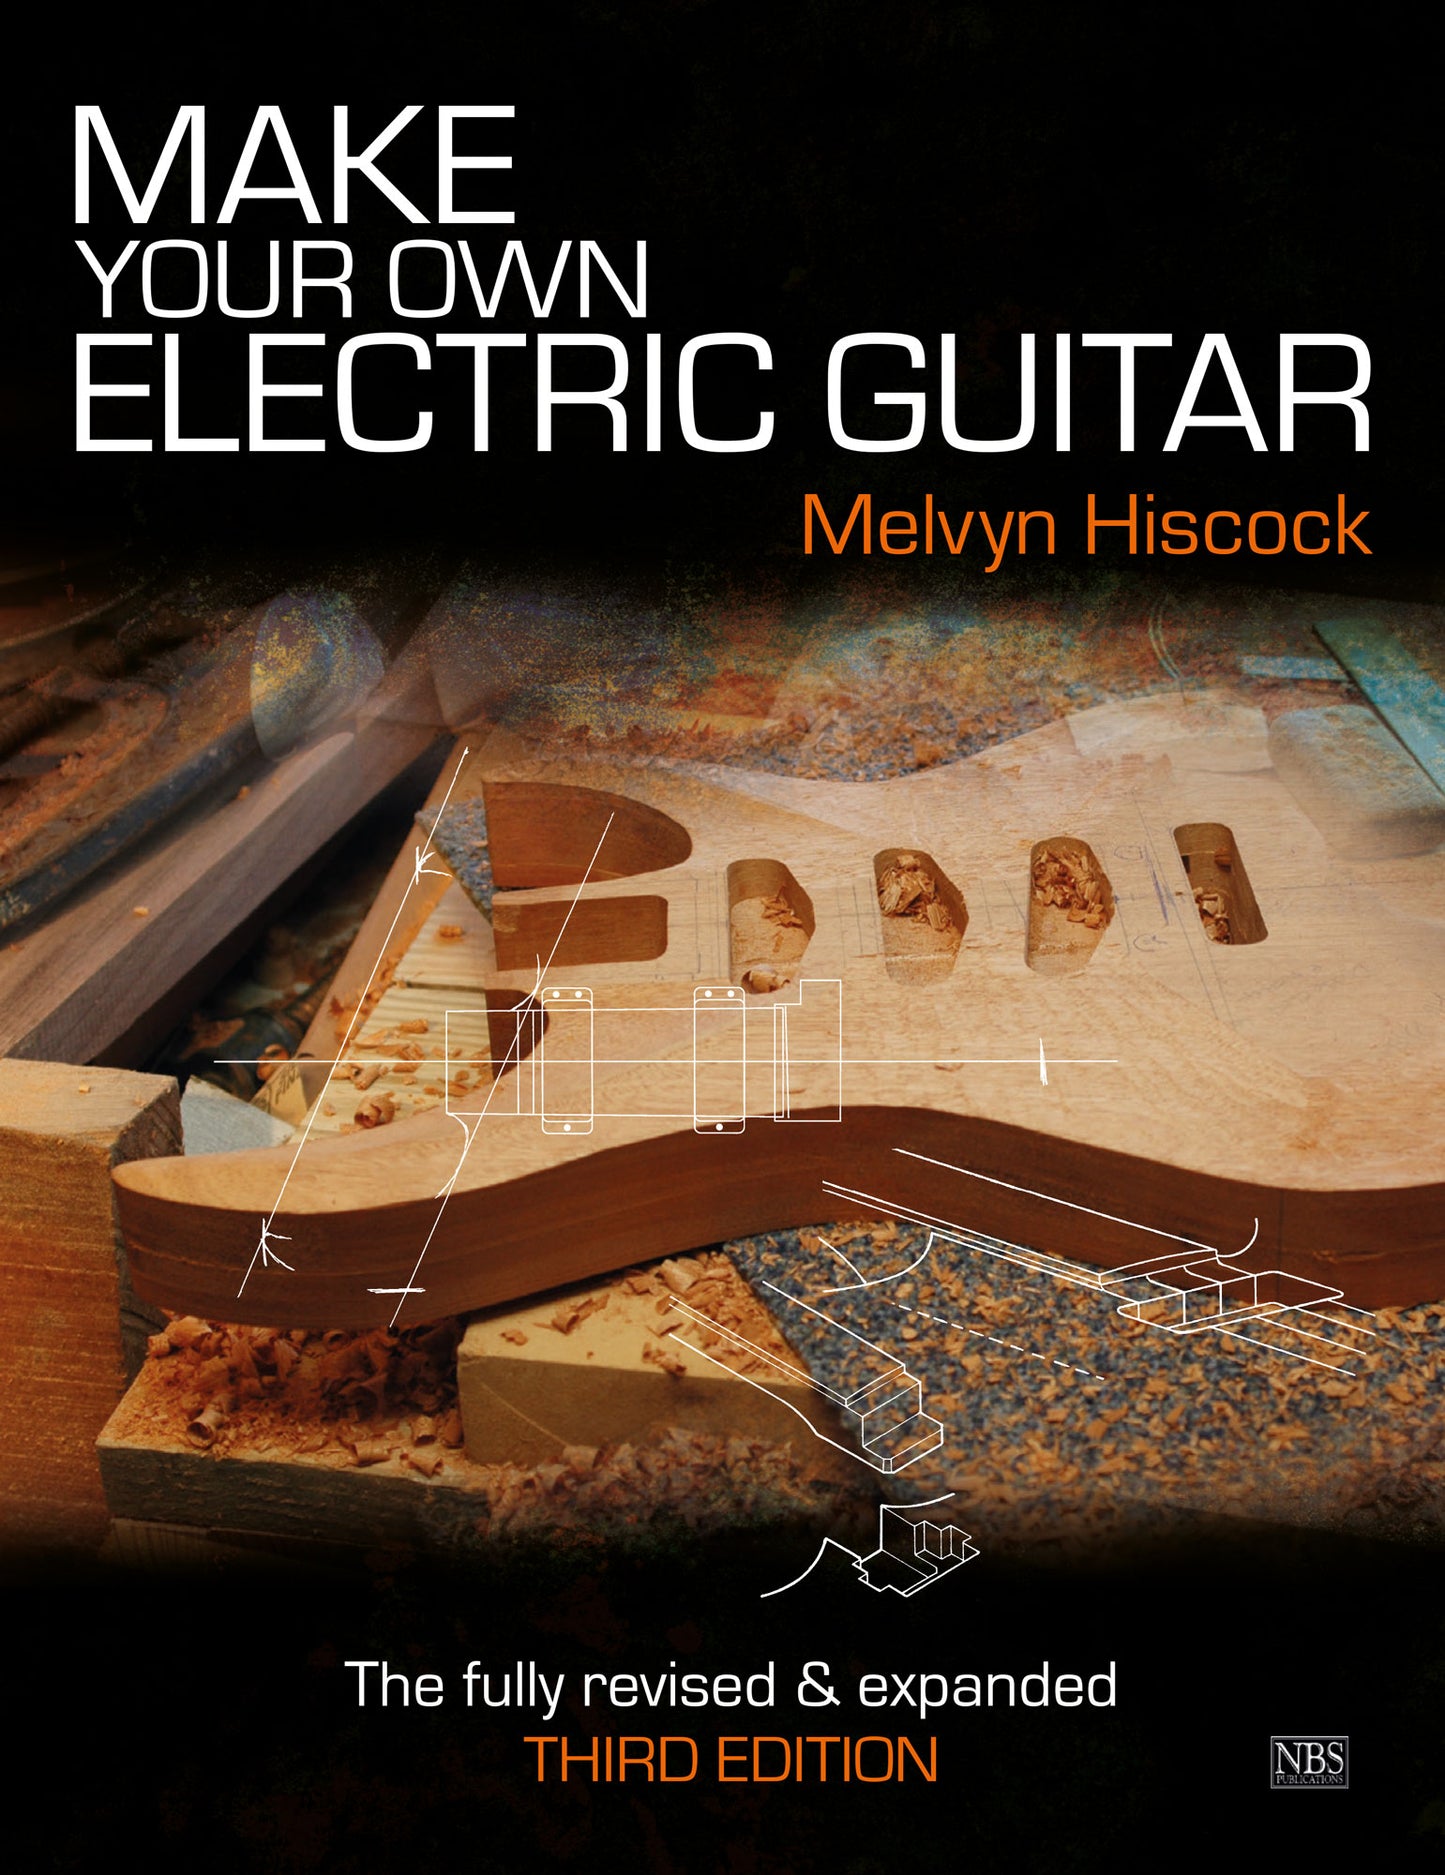 Make Your Own Electric Guitar by Melvyn Hiscock - 3rd Edition